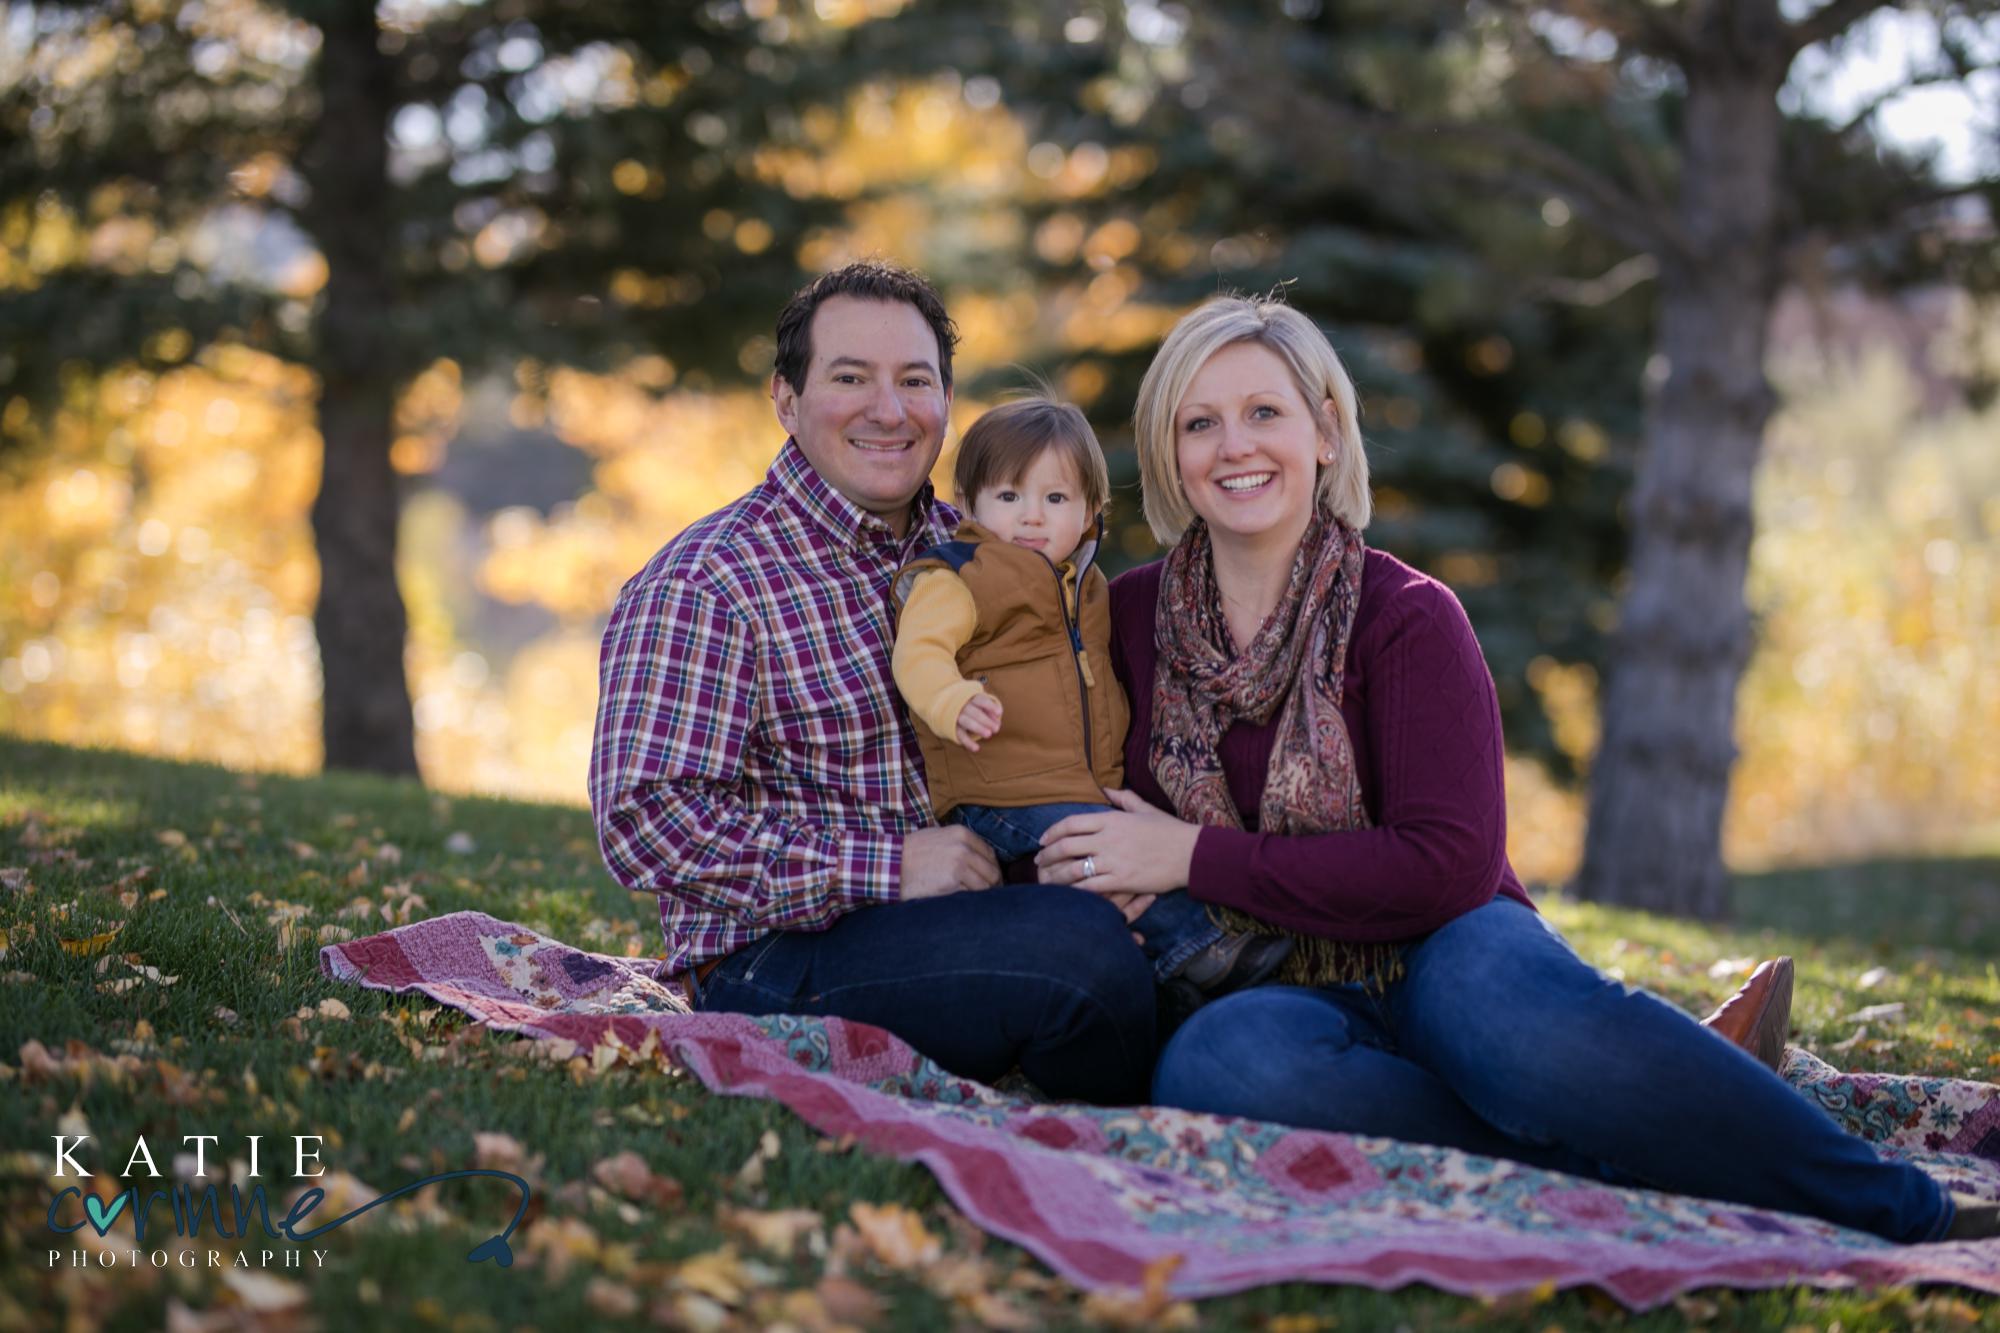 Child Photographers in colorado Springs